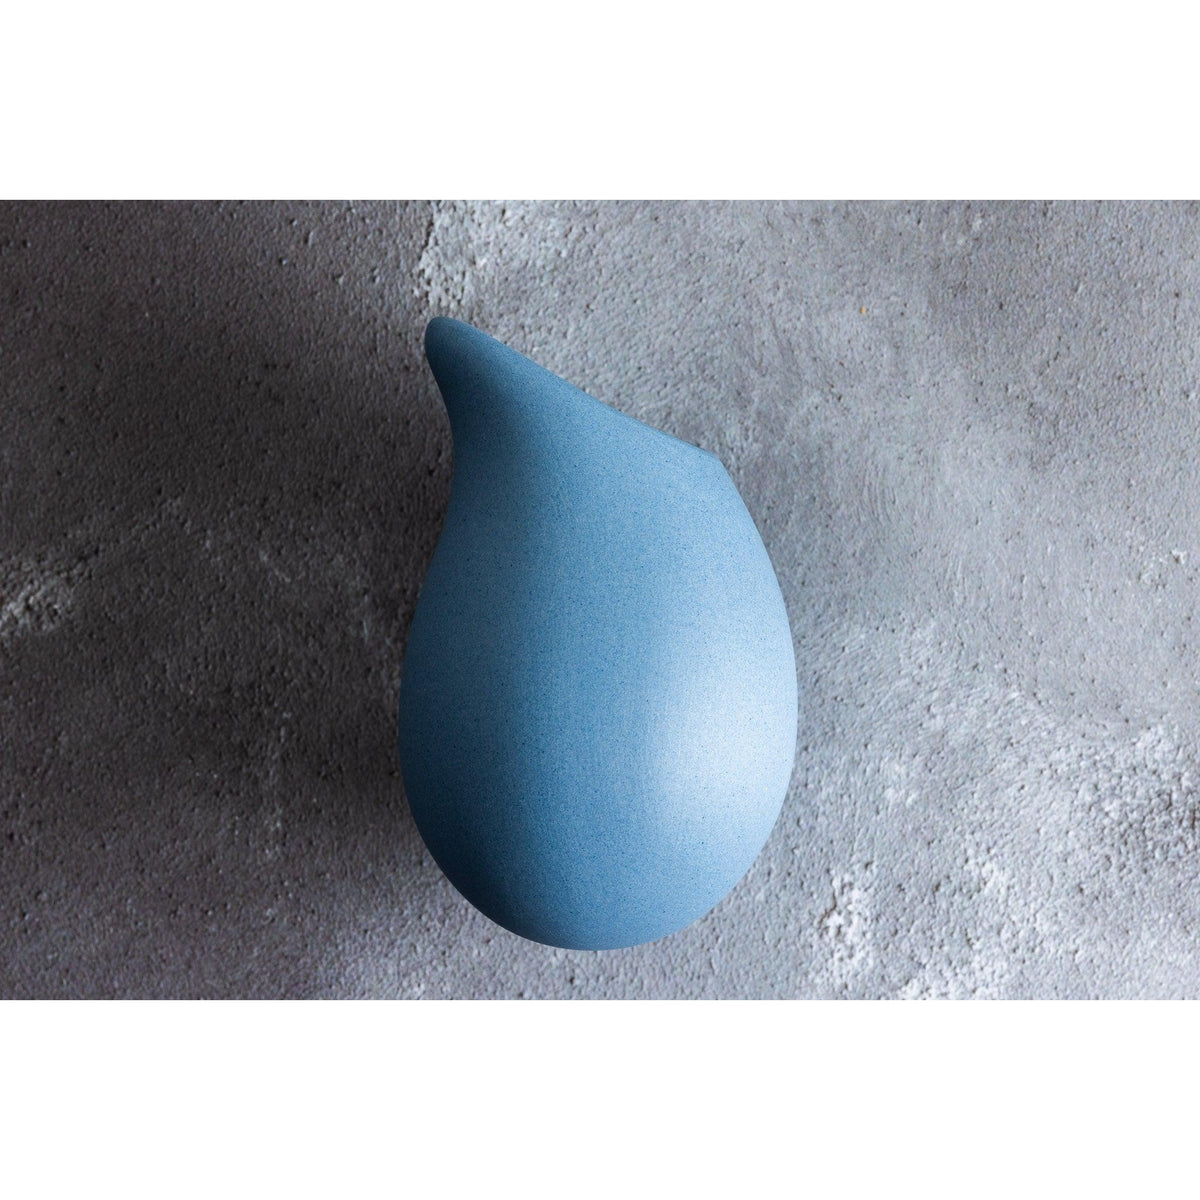 KSQ4 Droplet Wall Vase by Kate Schuricht, available at Padstow Gallery, Cornwall